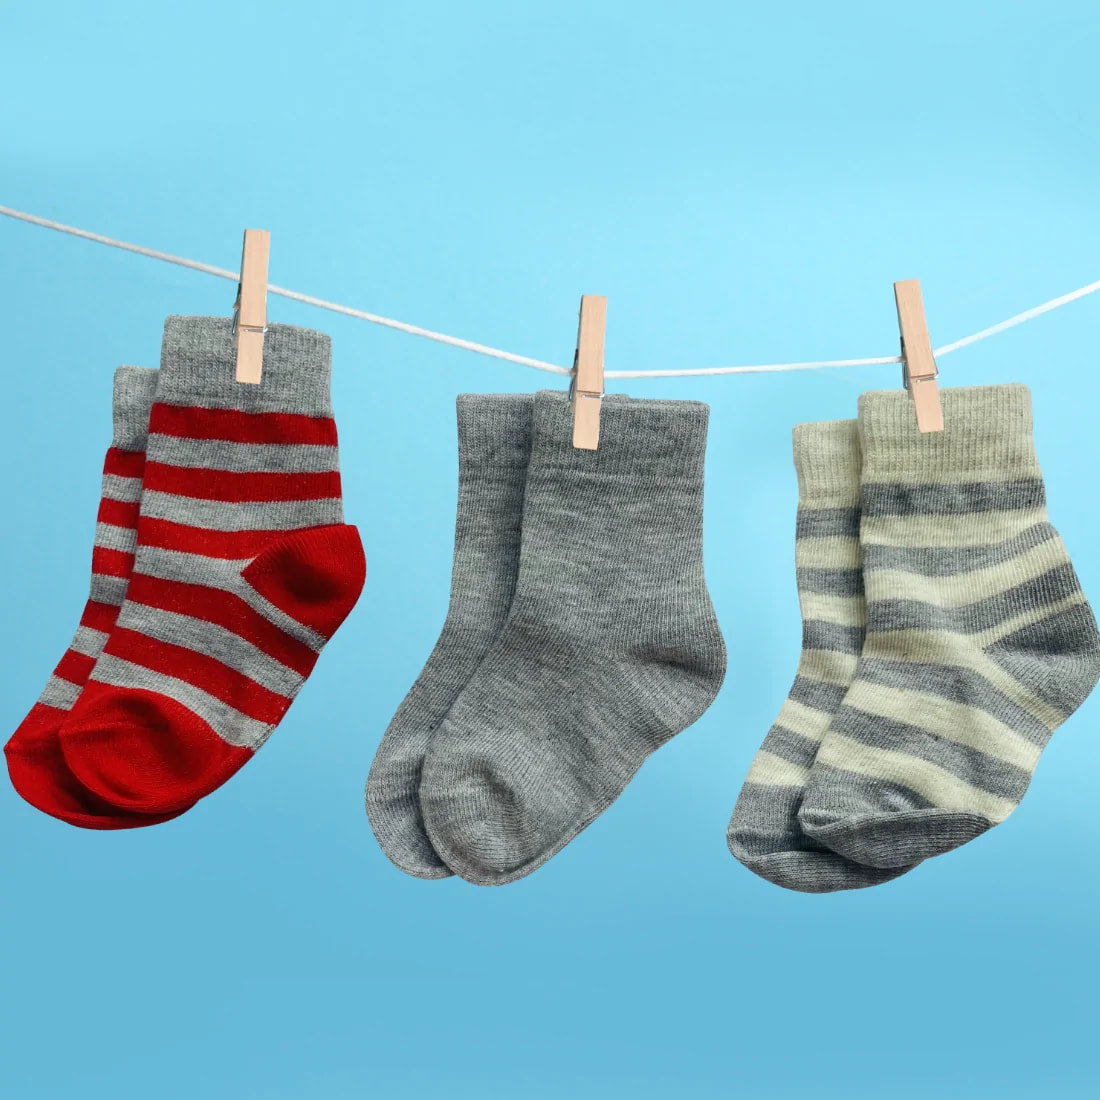 Baby Socks 6-12 Months - Unisex Grey Striped & Solid (Pack of 3)